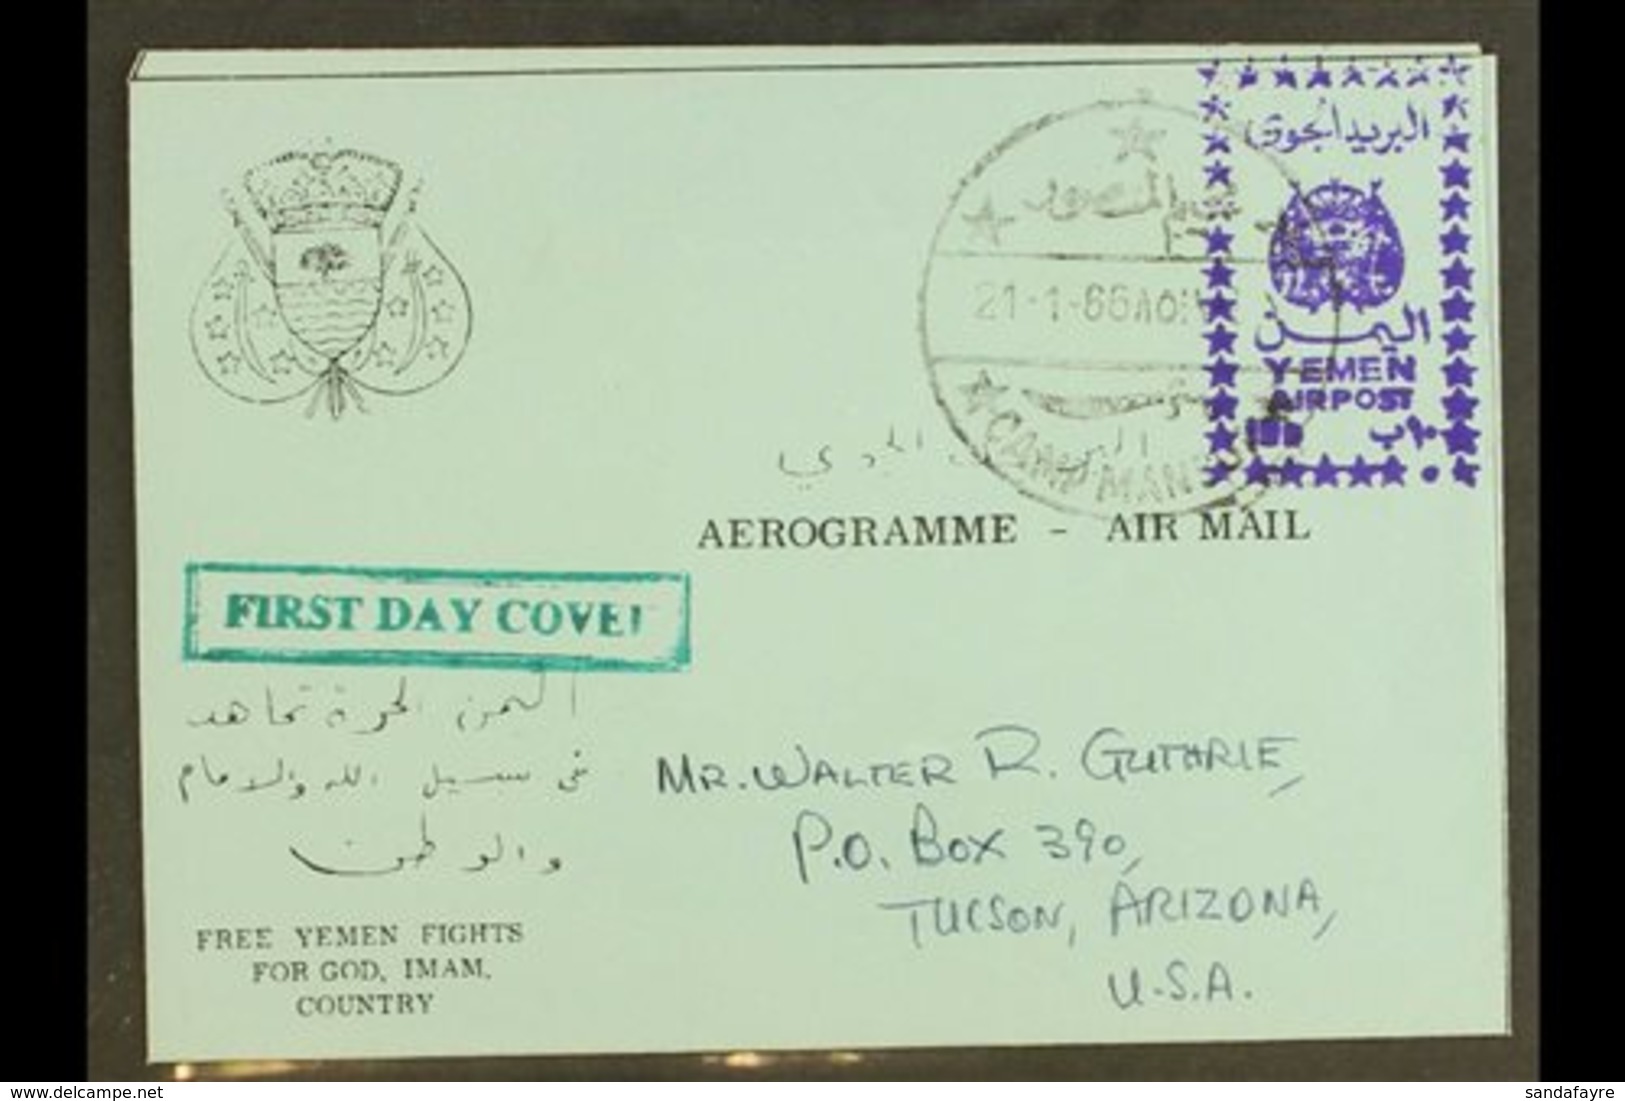 ROYALIST 1966 (21 Jan) 10b Violet Handstamp (as SG R130/134) On Blue Aerogramme Addressed To The USA And Cancelled By Ca - Jemen